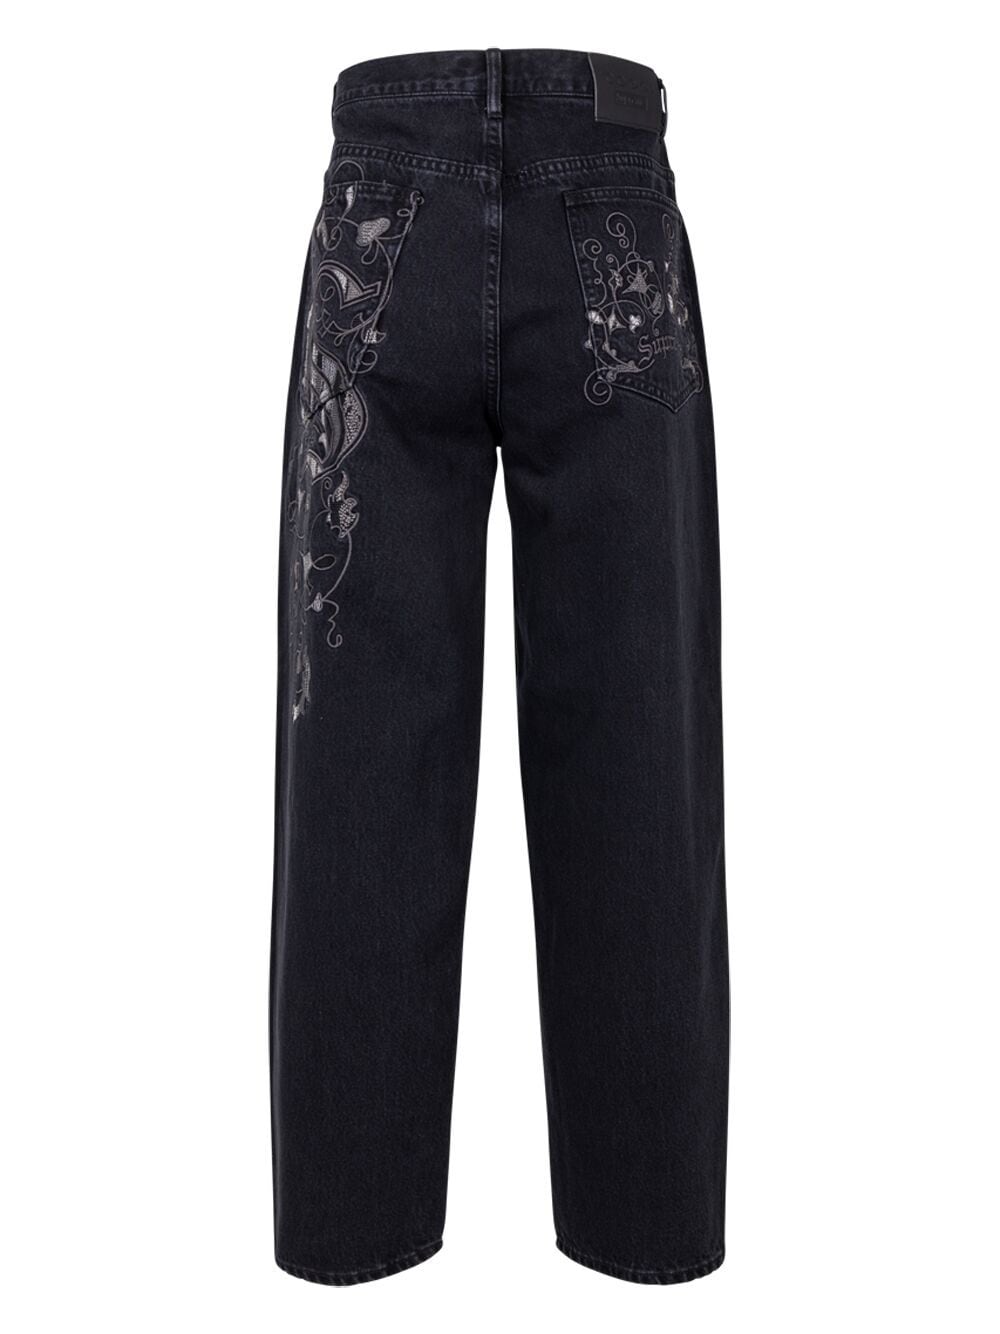 Supreme x Coogi Baggy Embroidered Loose-Fit Jeans - Black